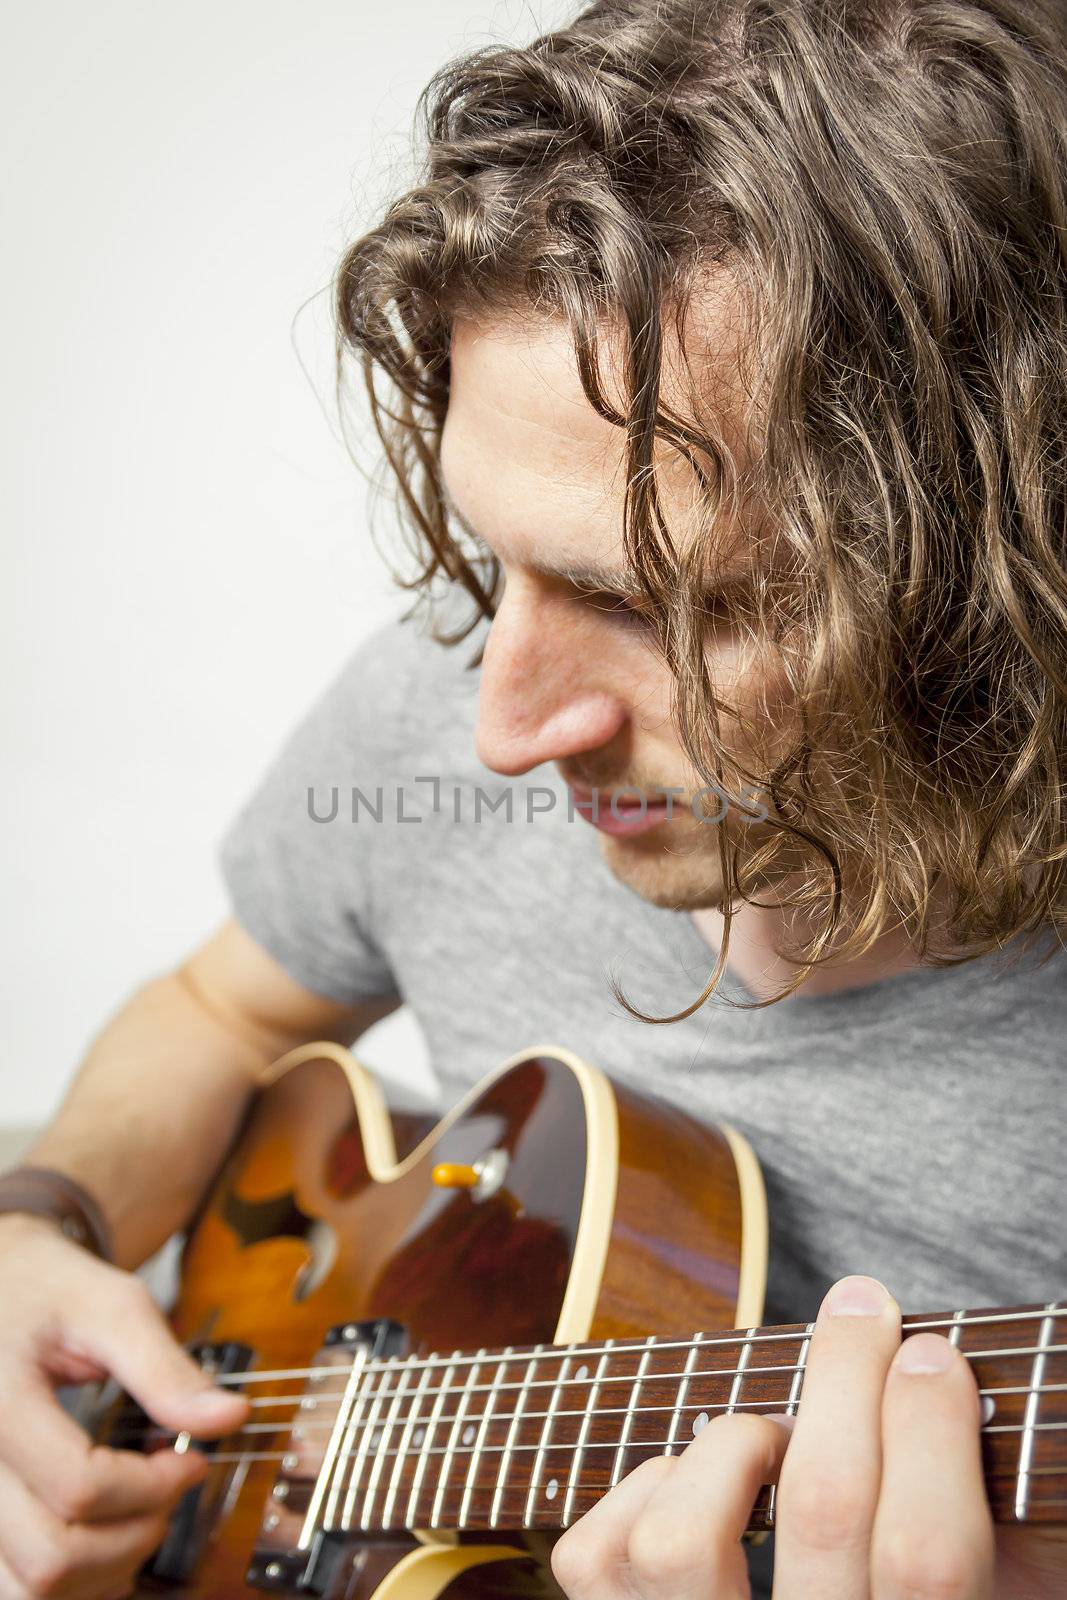 An image of a handsome man playing the guitar